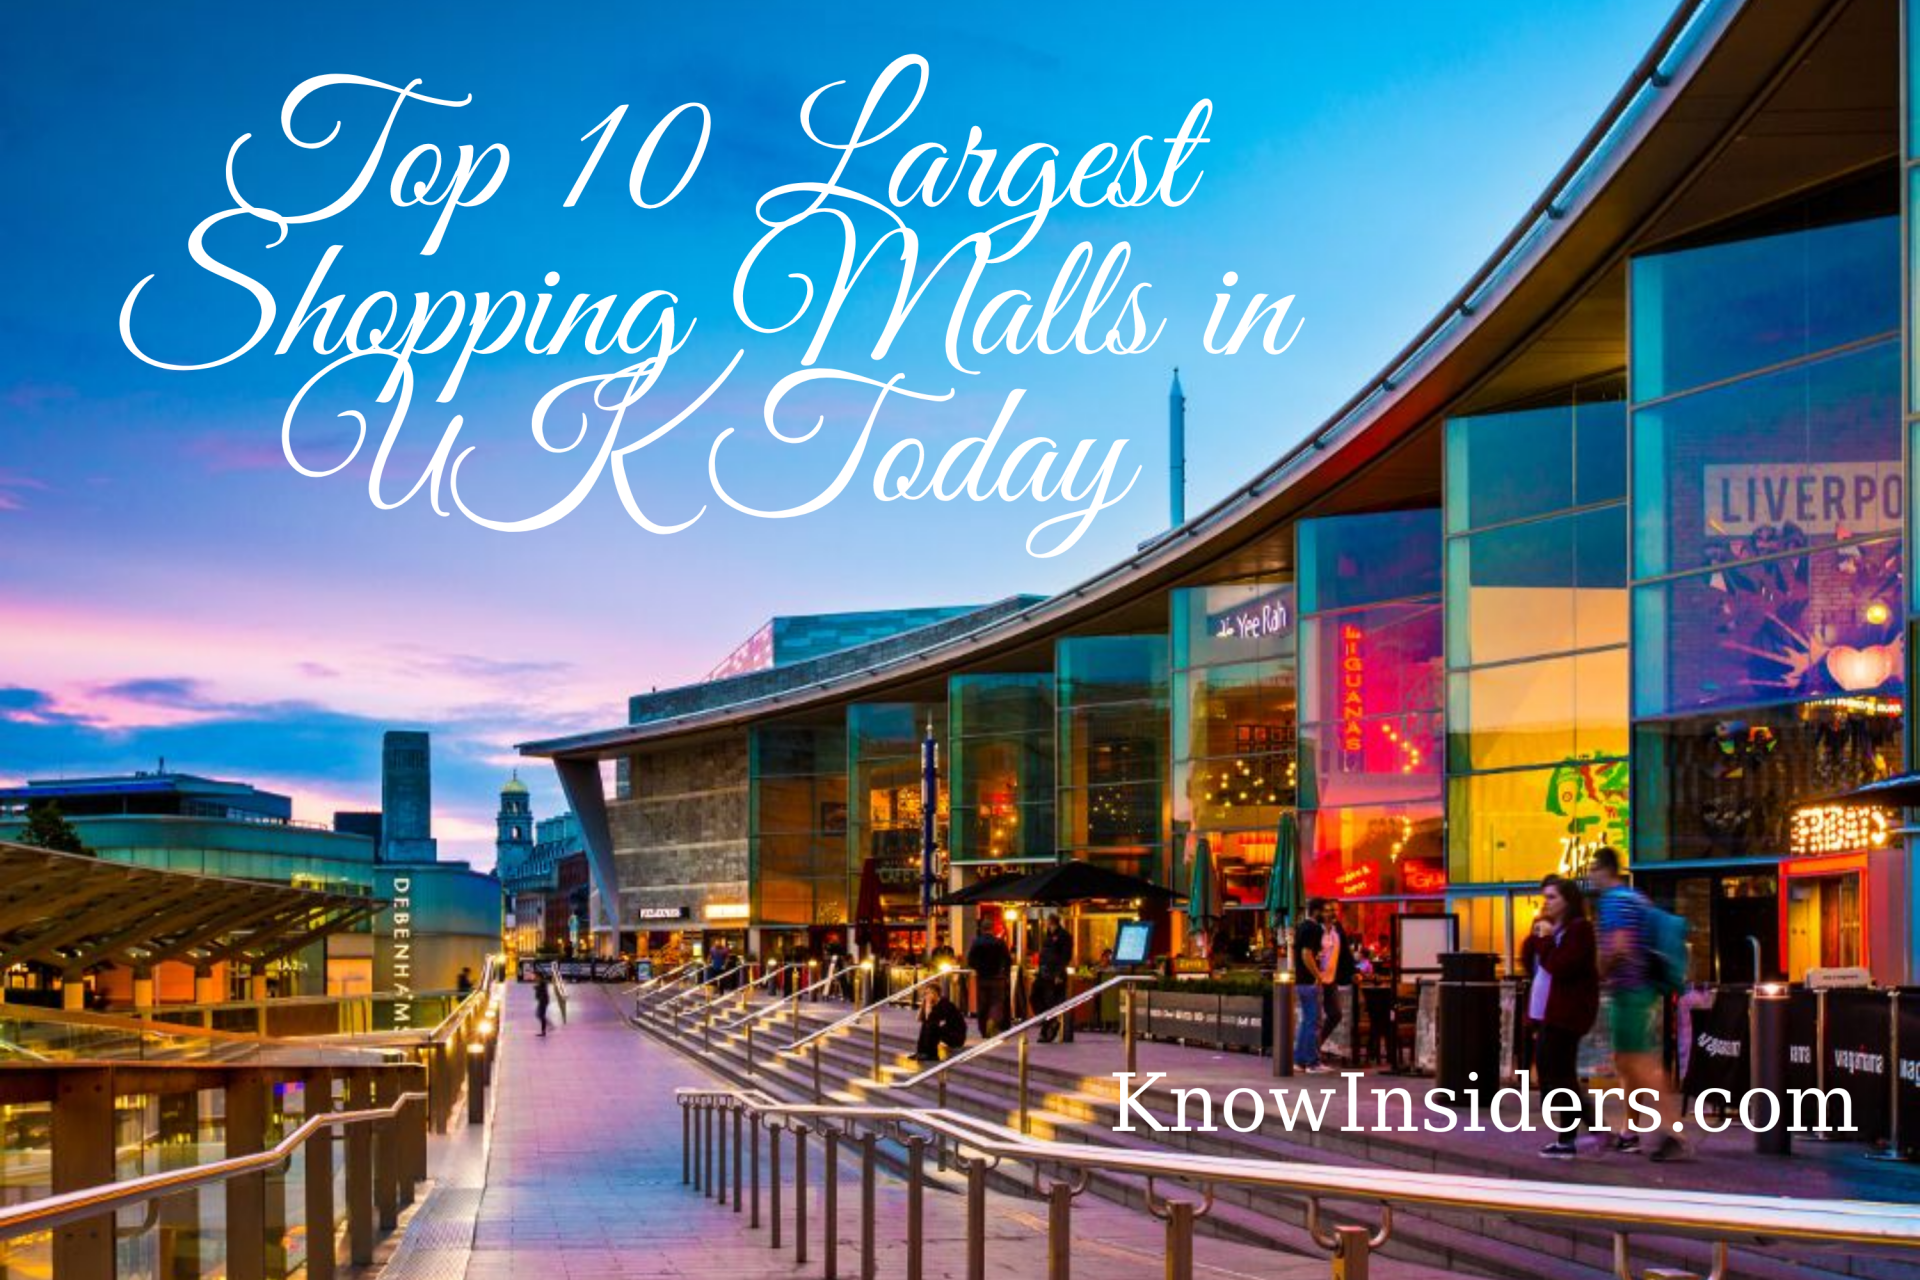 Top 10 Largest Shopping Malls in UK Today